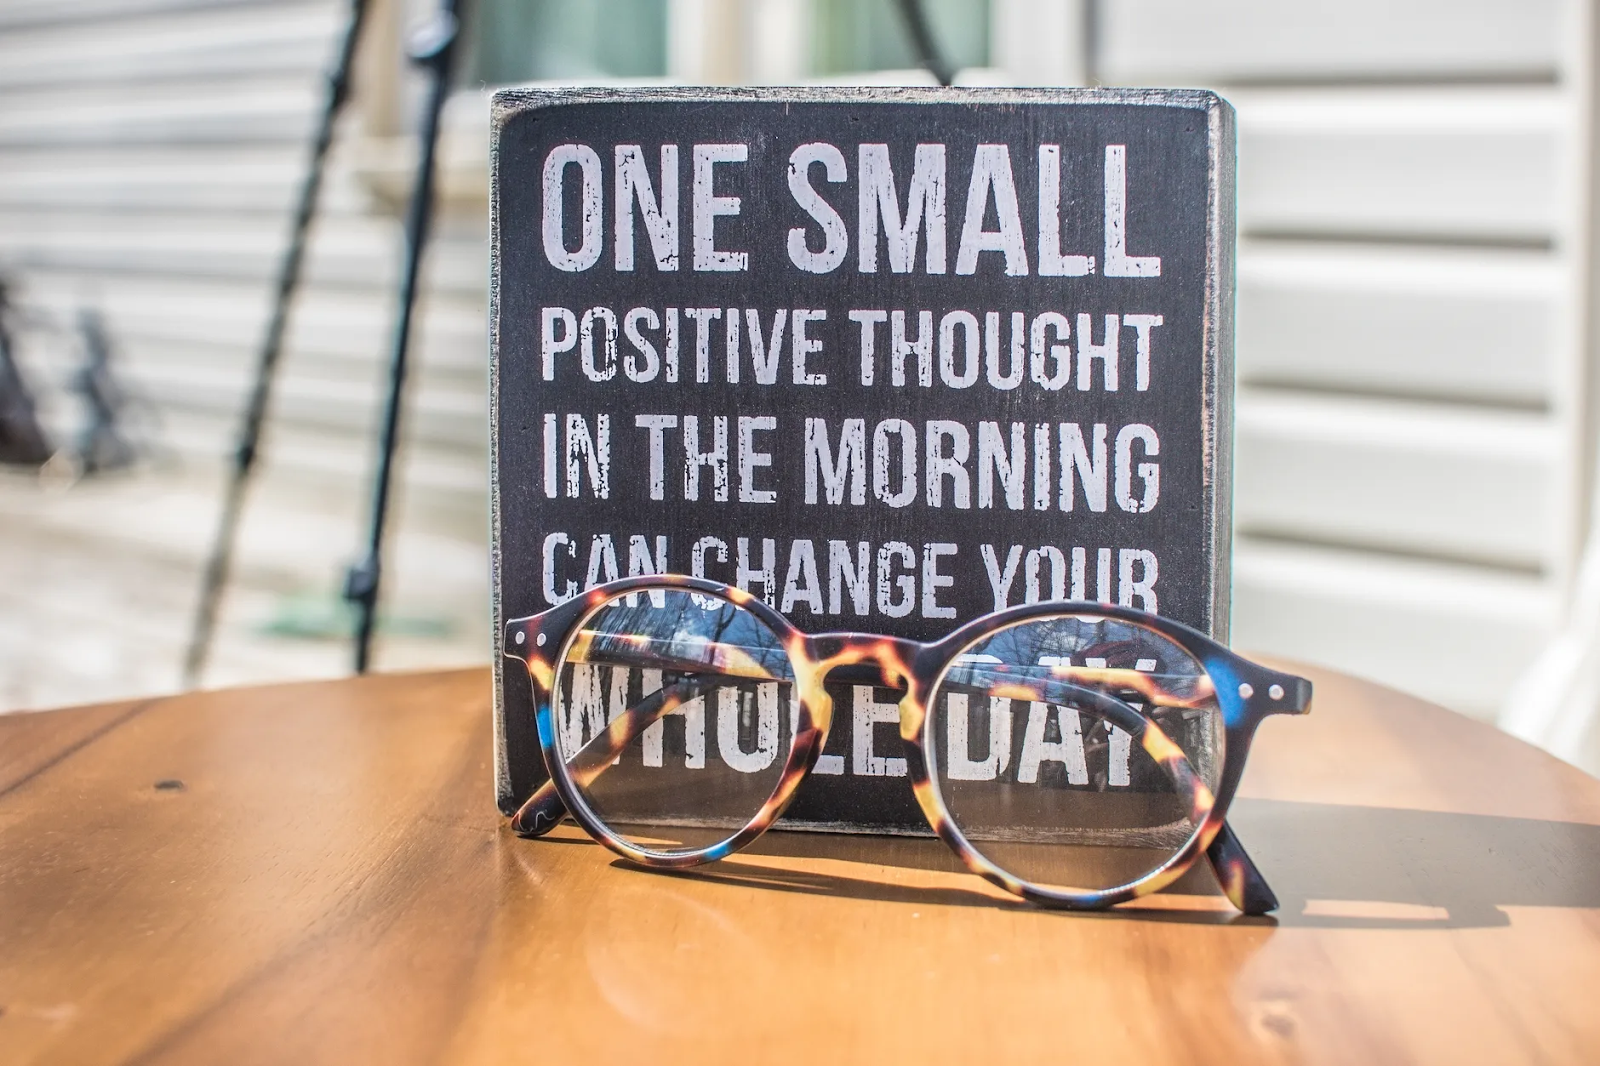 A sign standing on a table has the words "One Small Positive Thought in the Morning Can Change Your Whole Day." A pair of glasses rests in front of it